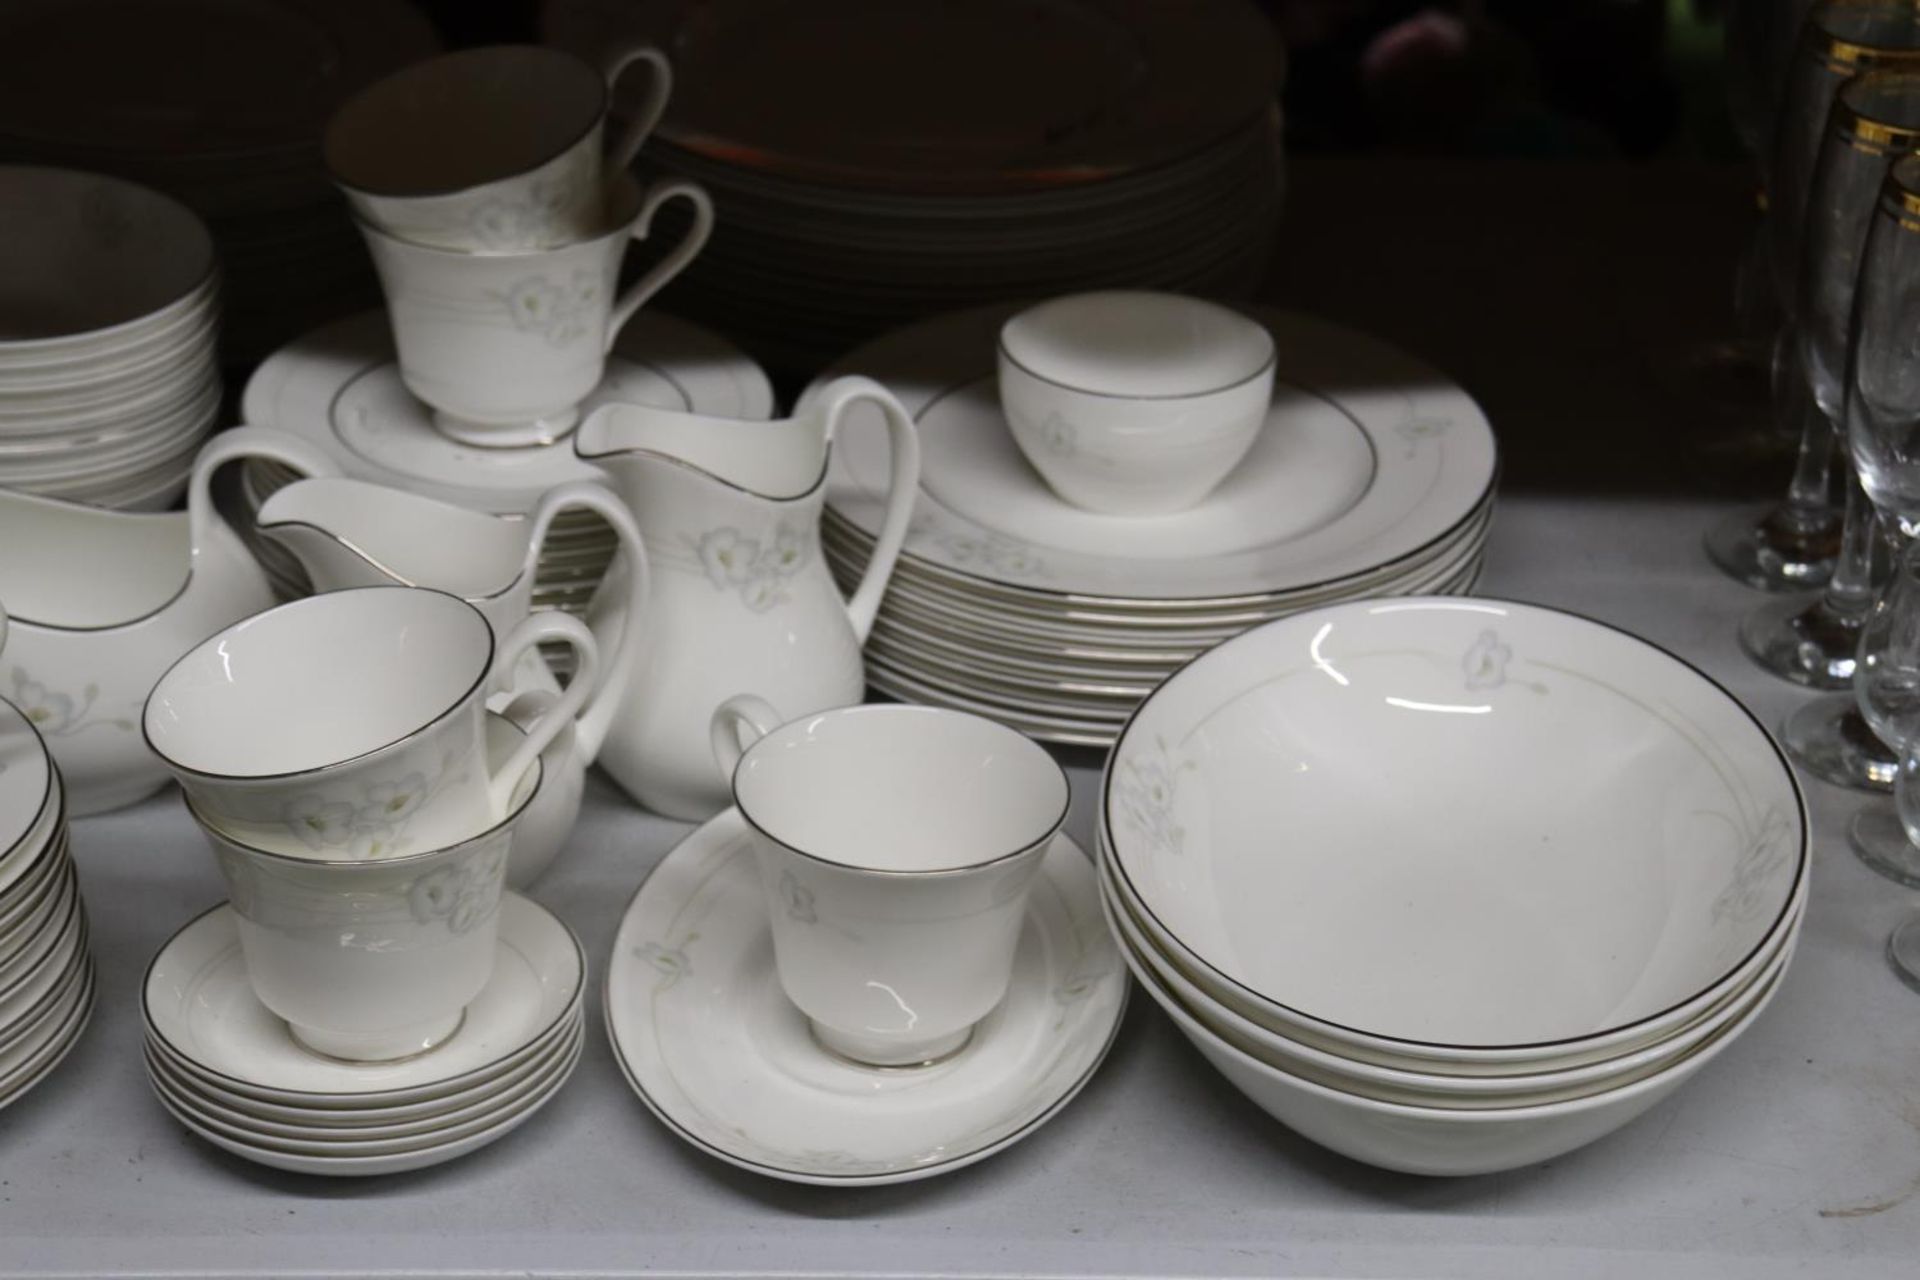 A LARGE QUANTITY OF ROYAL DOULTON "MYSTIQUE" TO INCLUDE DINNER PATES, SAUCE BOAT, SERVING BOWLS, - Image 4 of 5